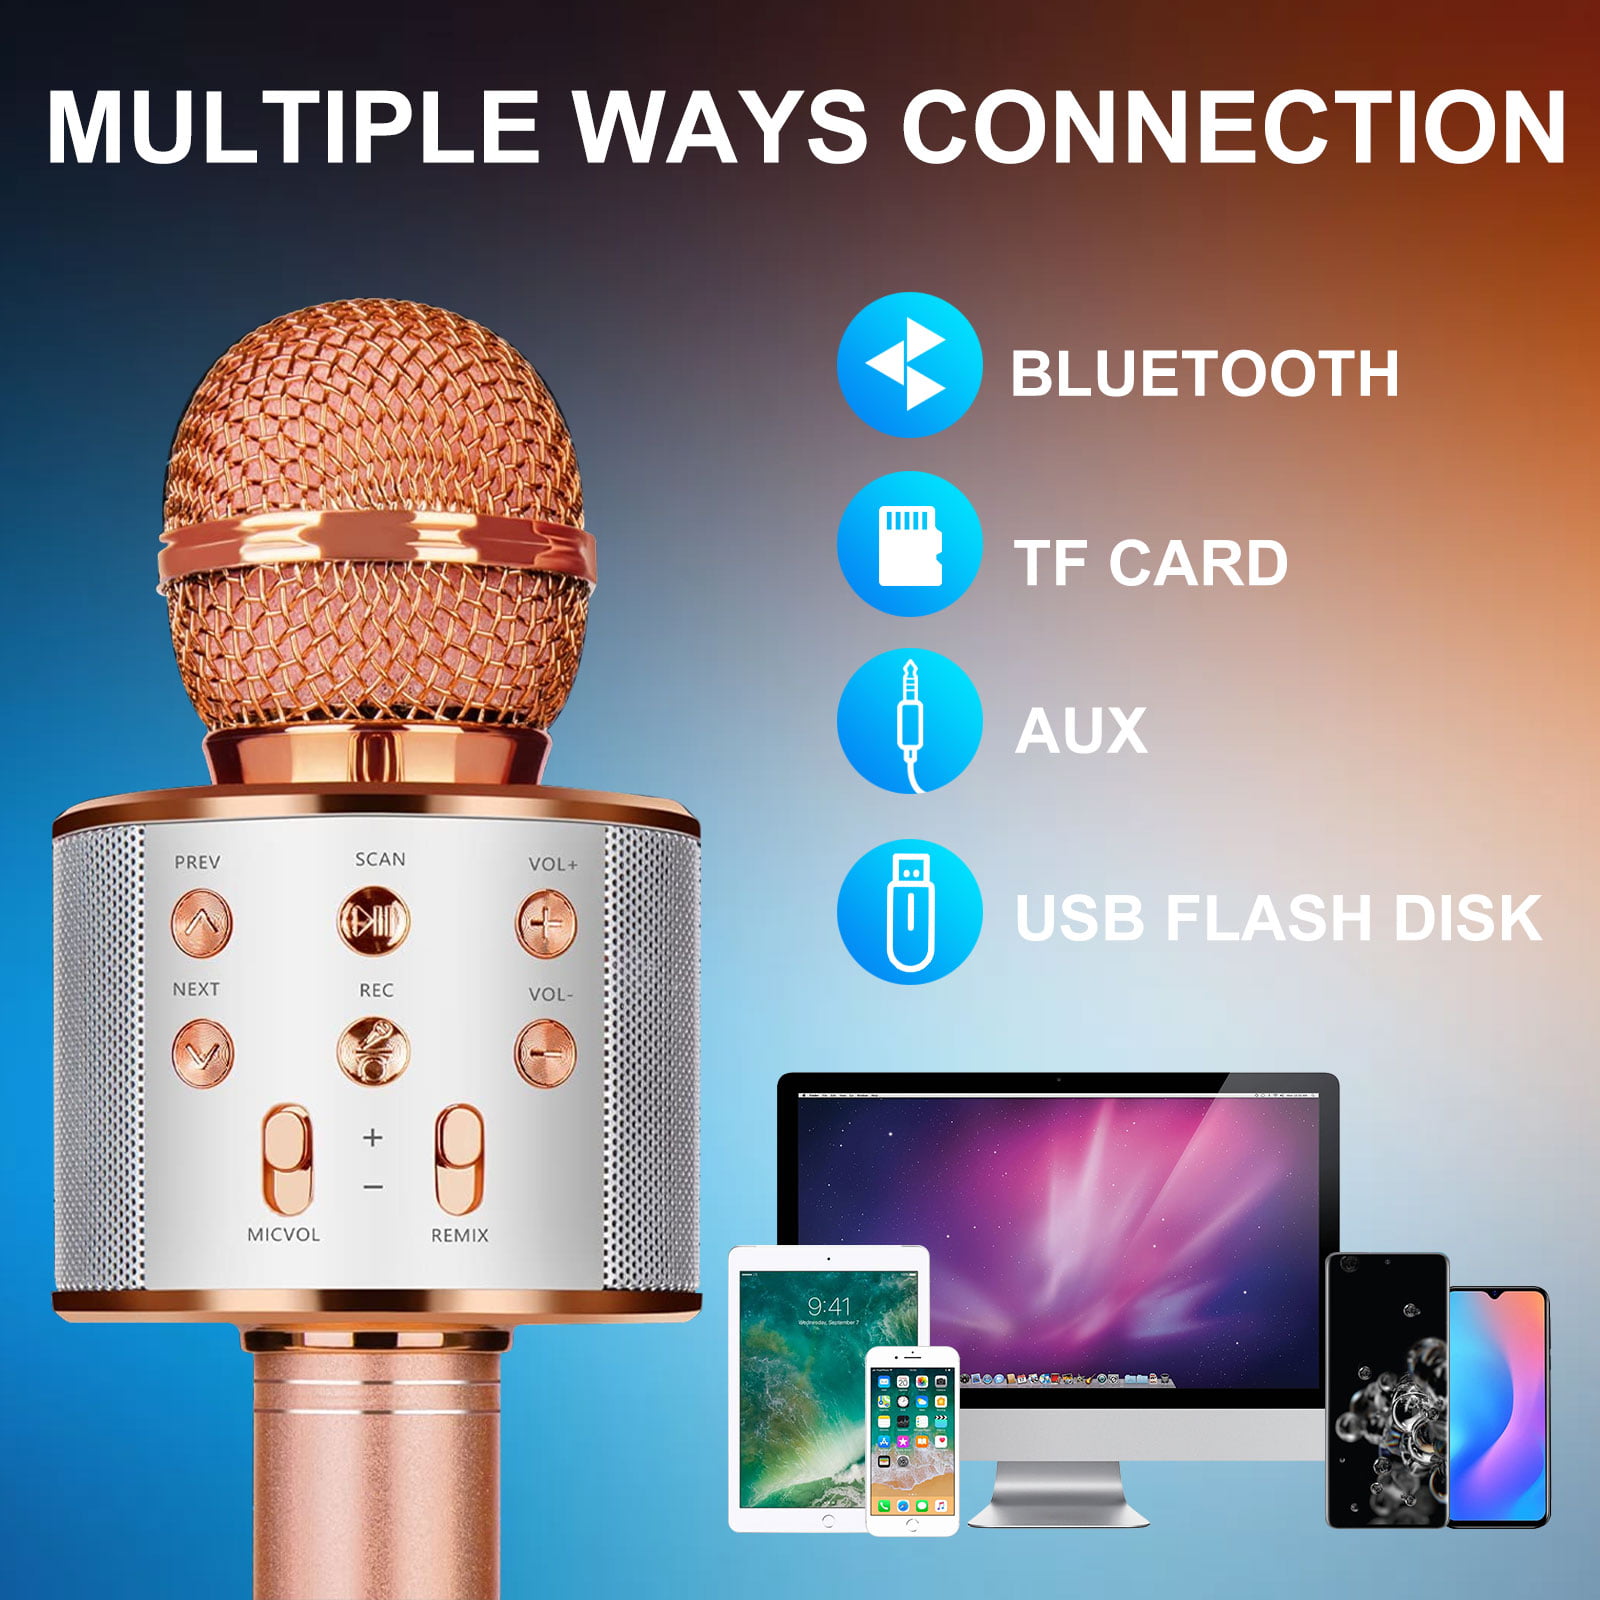 Space Grey Microphones BLAVOR Rose Gold Best Christmas Birthday Gifts for Men Women Karaoke Machine for Kids Adults Portable Leather Rechargeable Handheld Mic 2 PACK Bluetooth Karaoke Microphone 